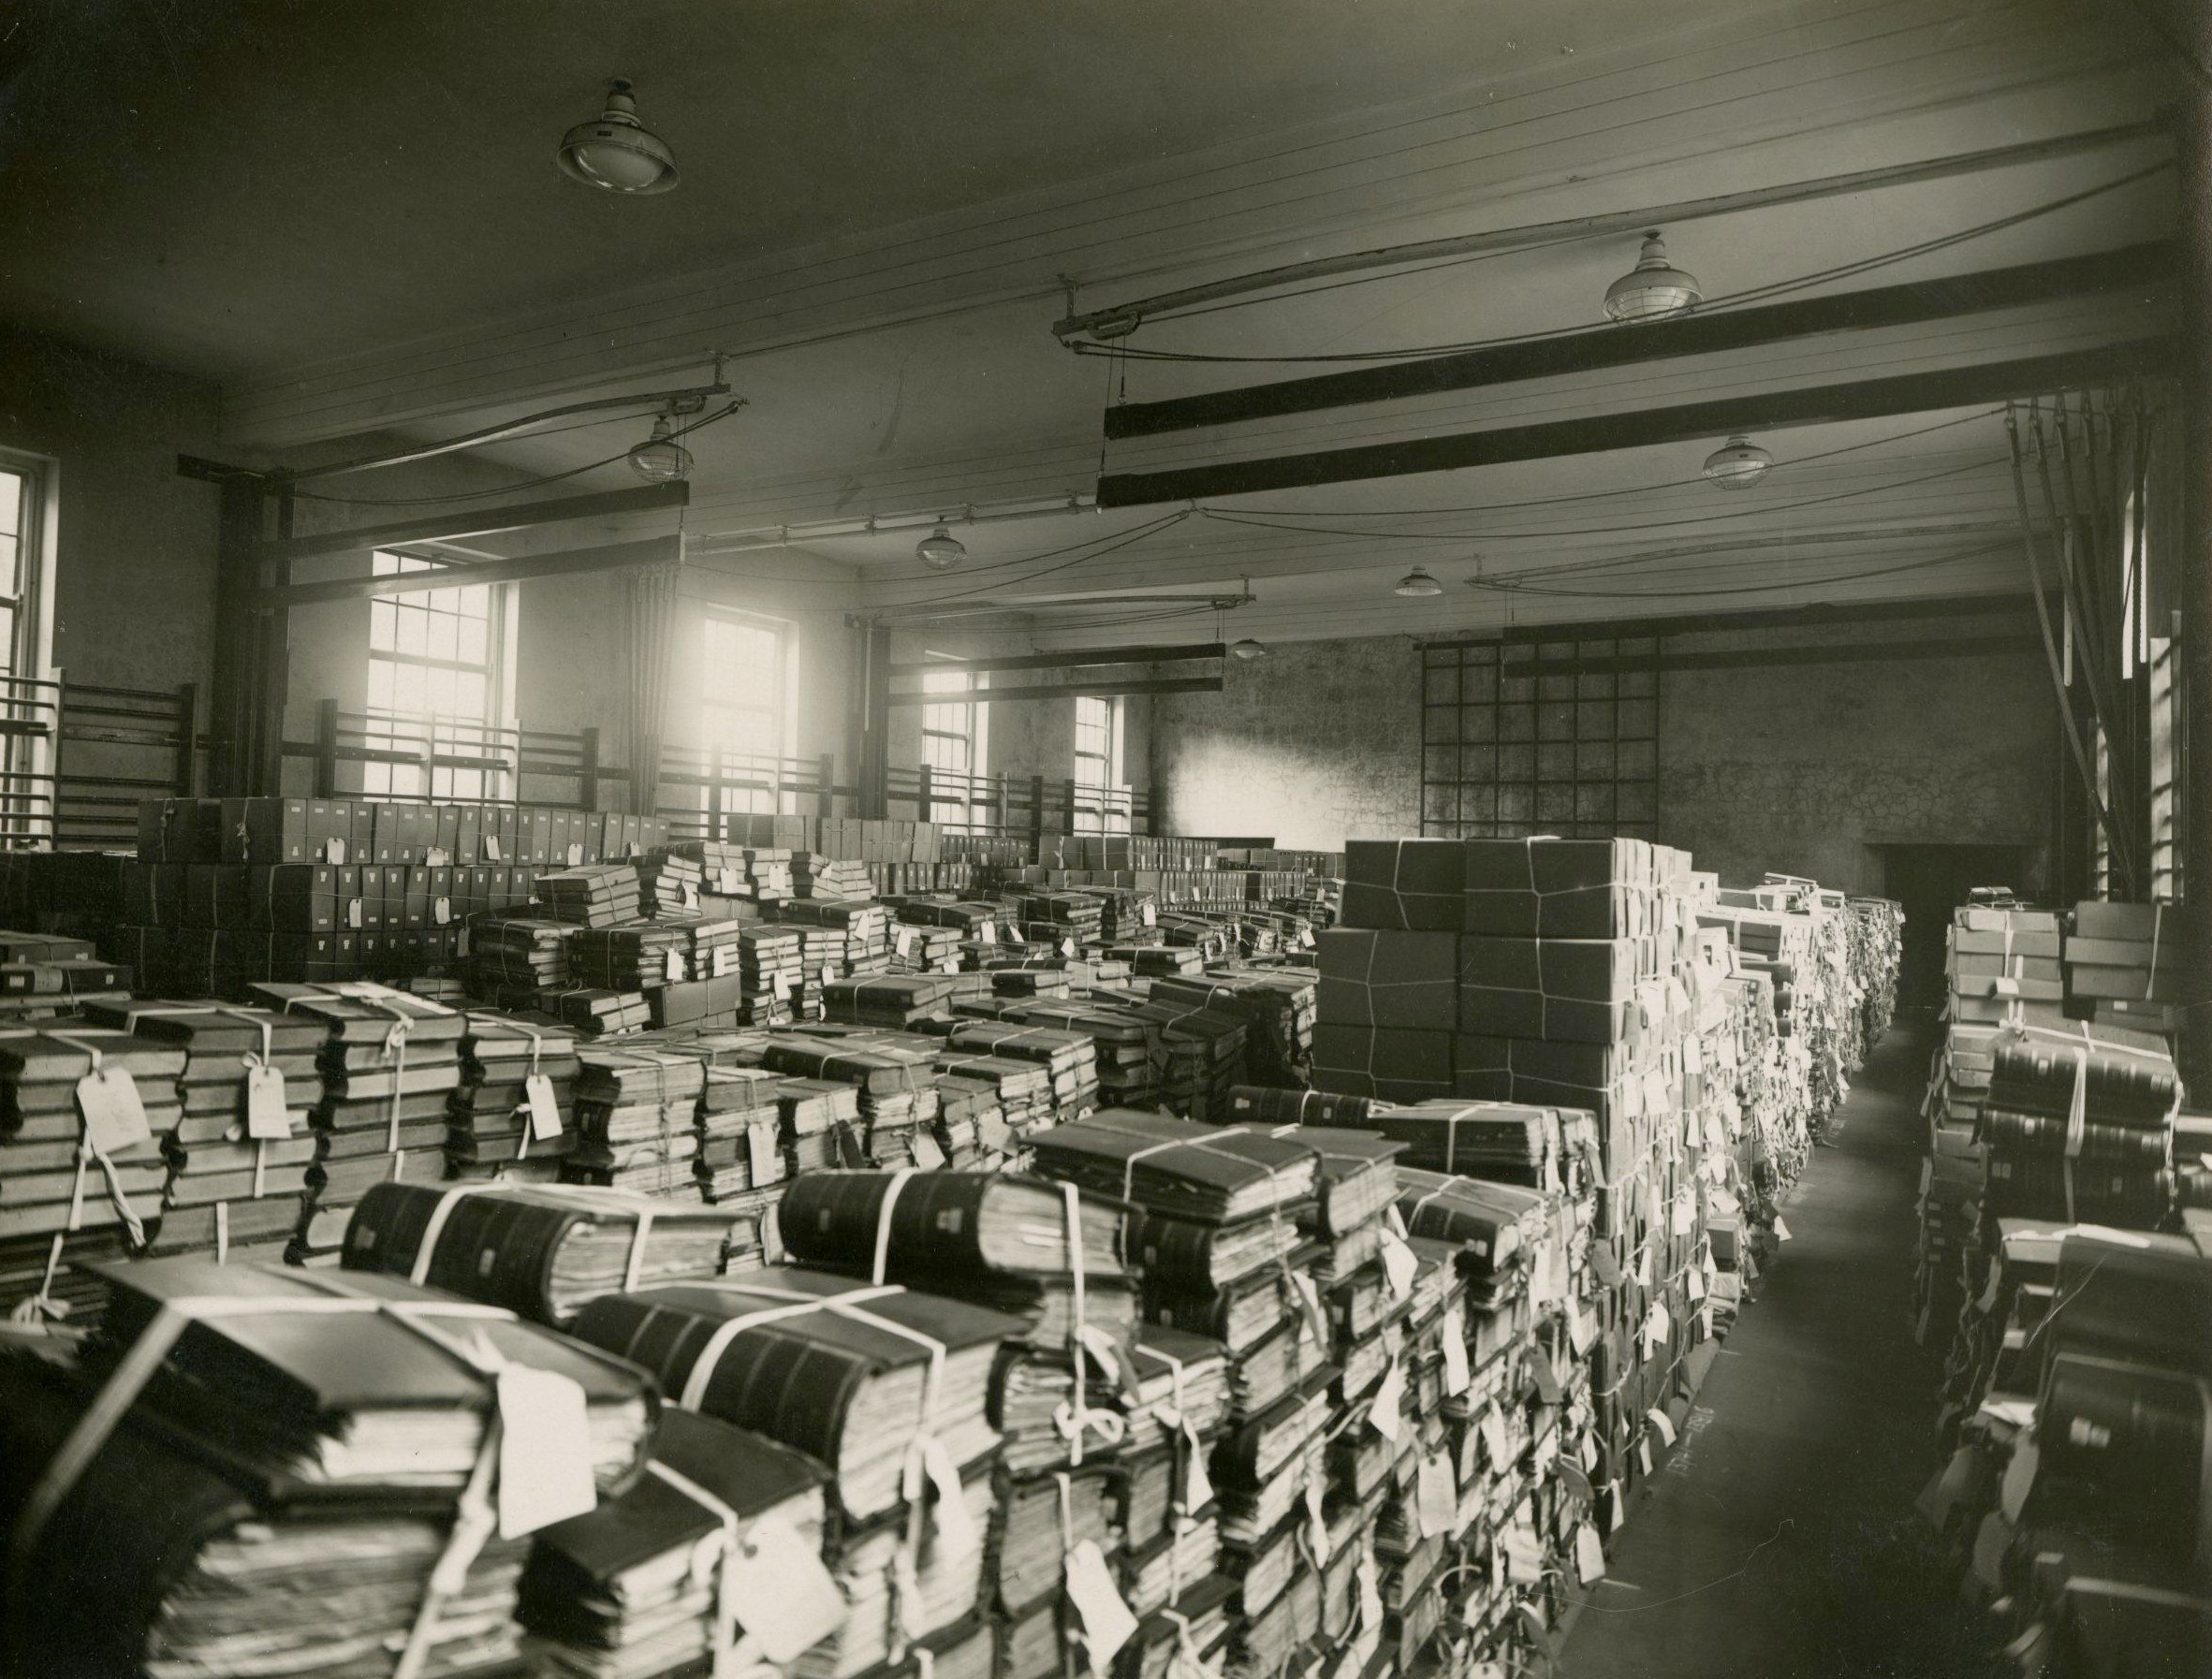 Records in tall piles in a large room